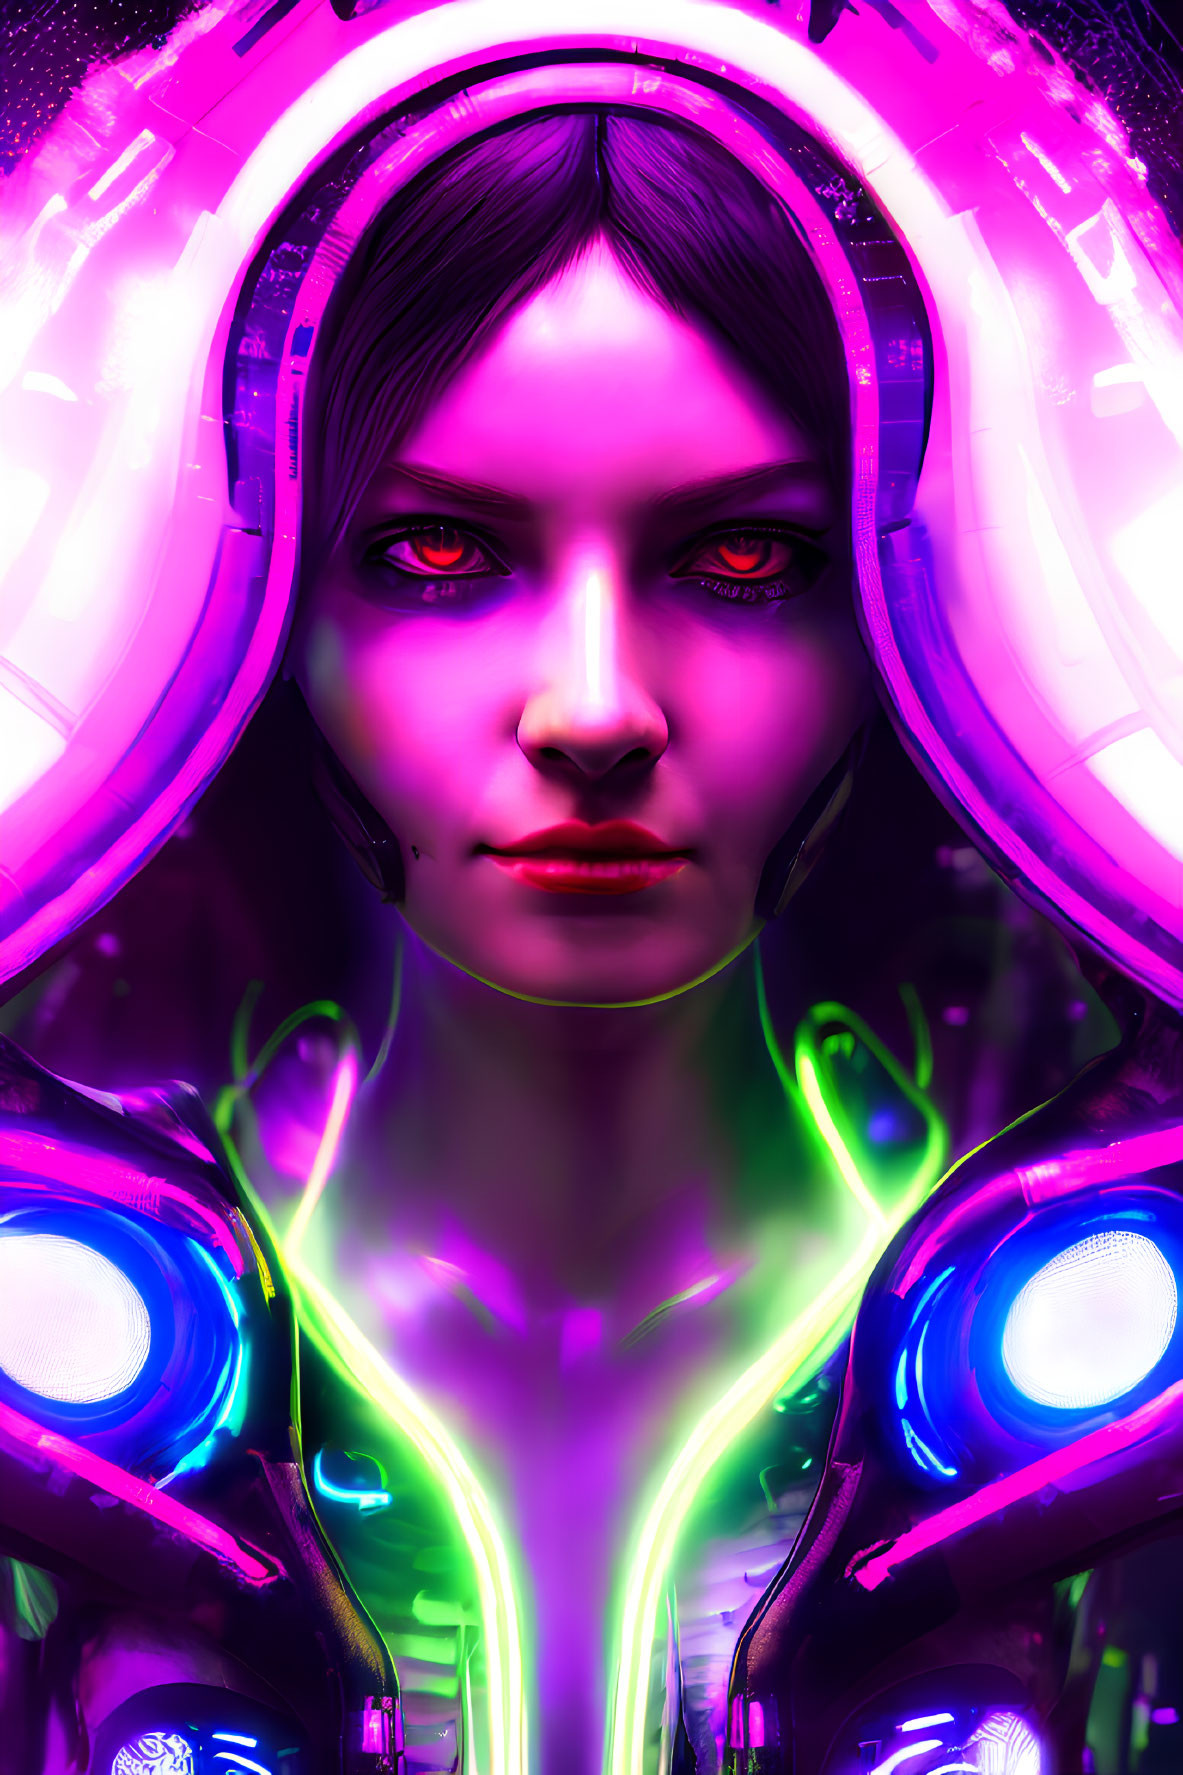 Futuristic female in glowing cyberpunk suit with headset amid neon lights